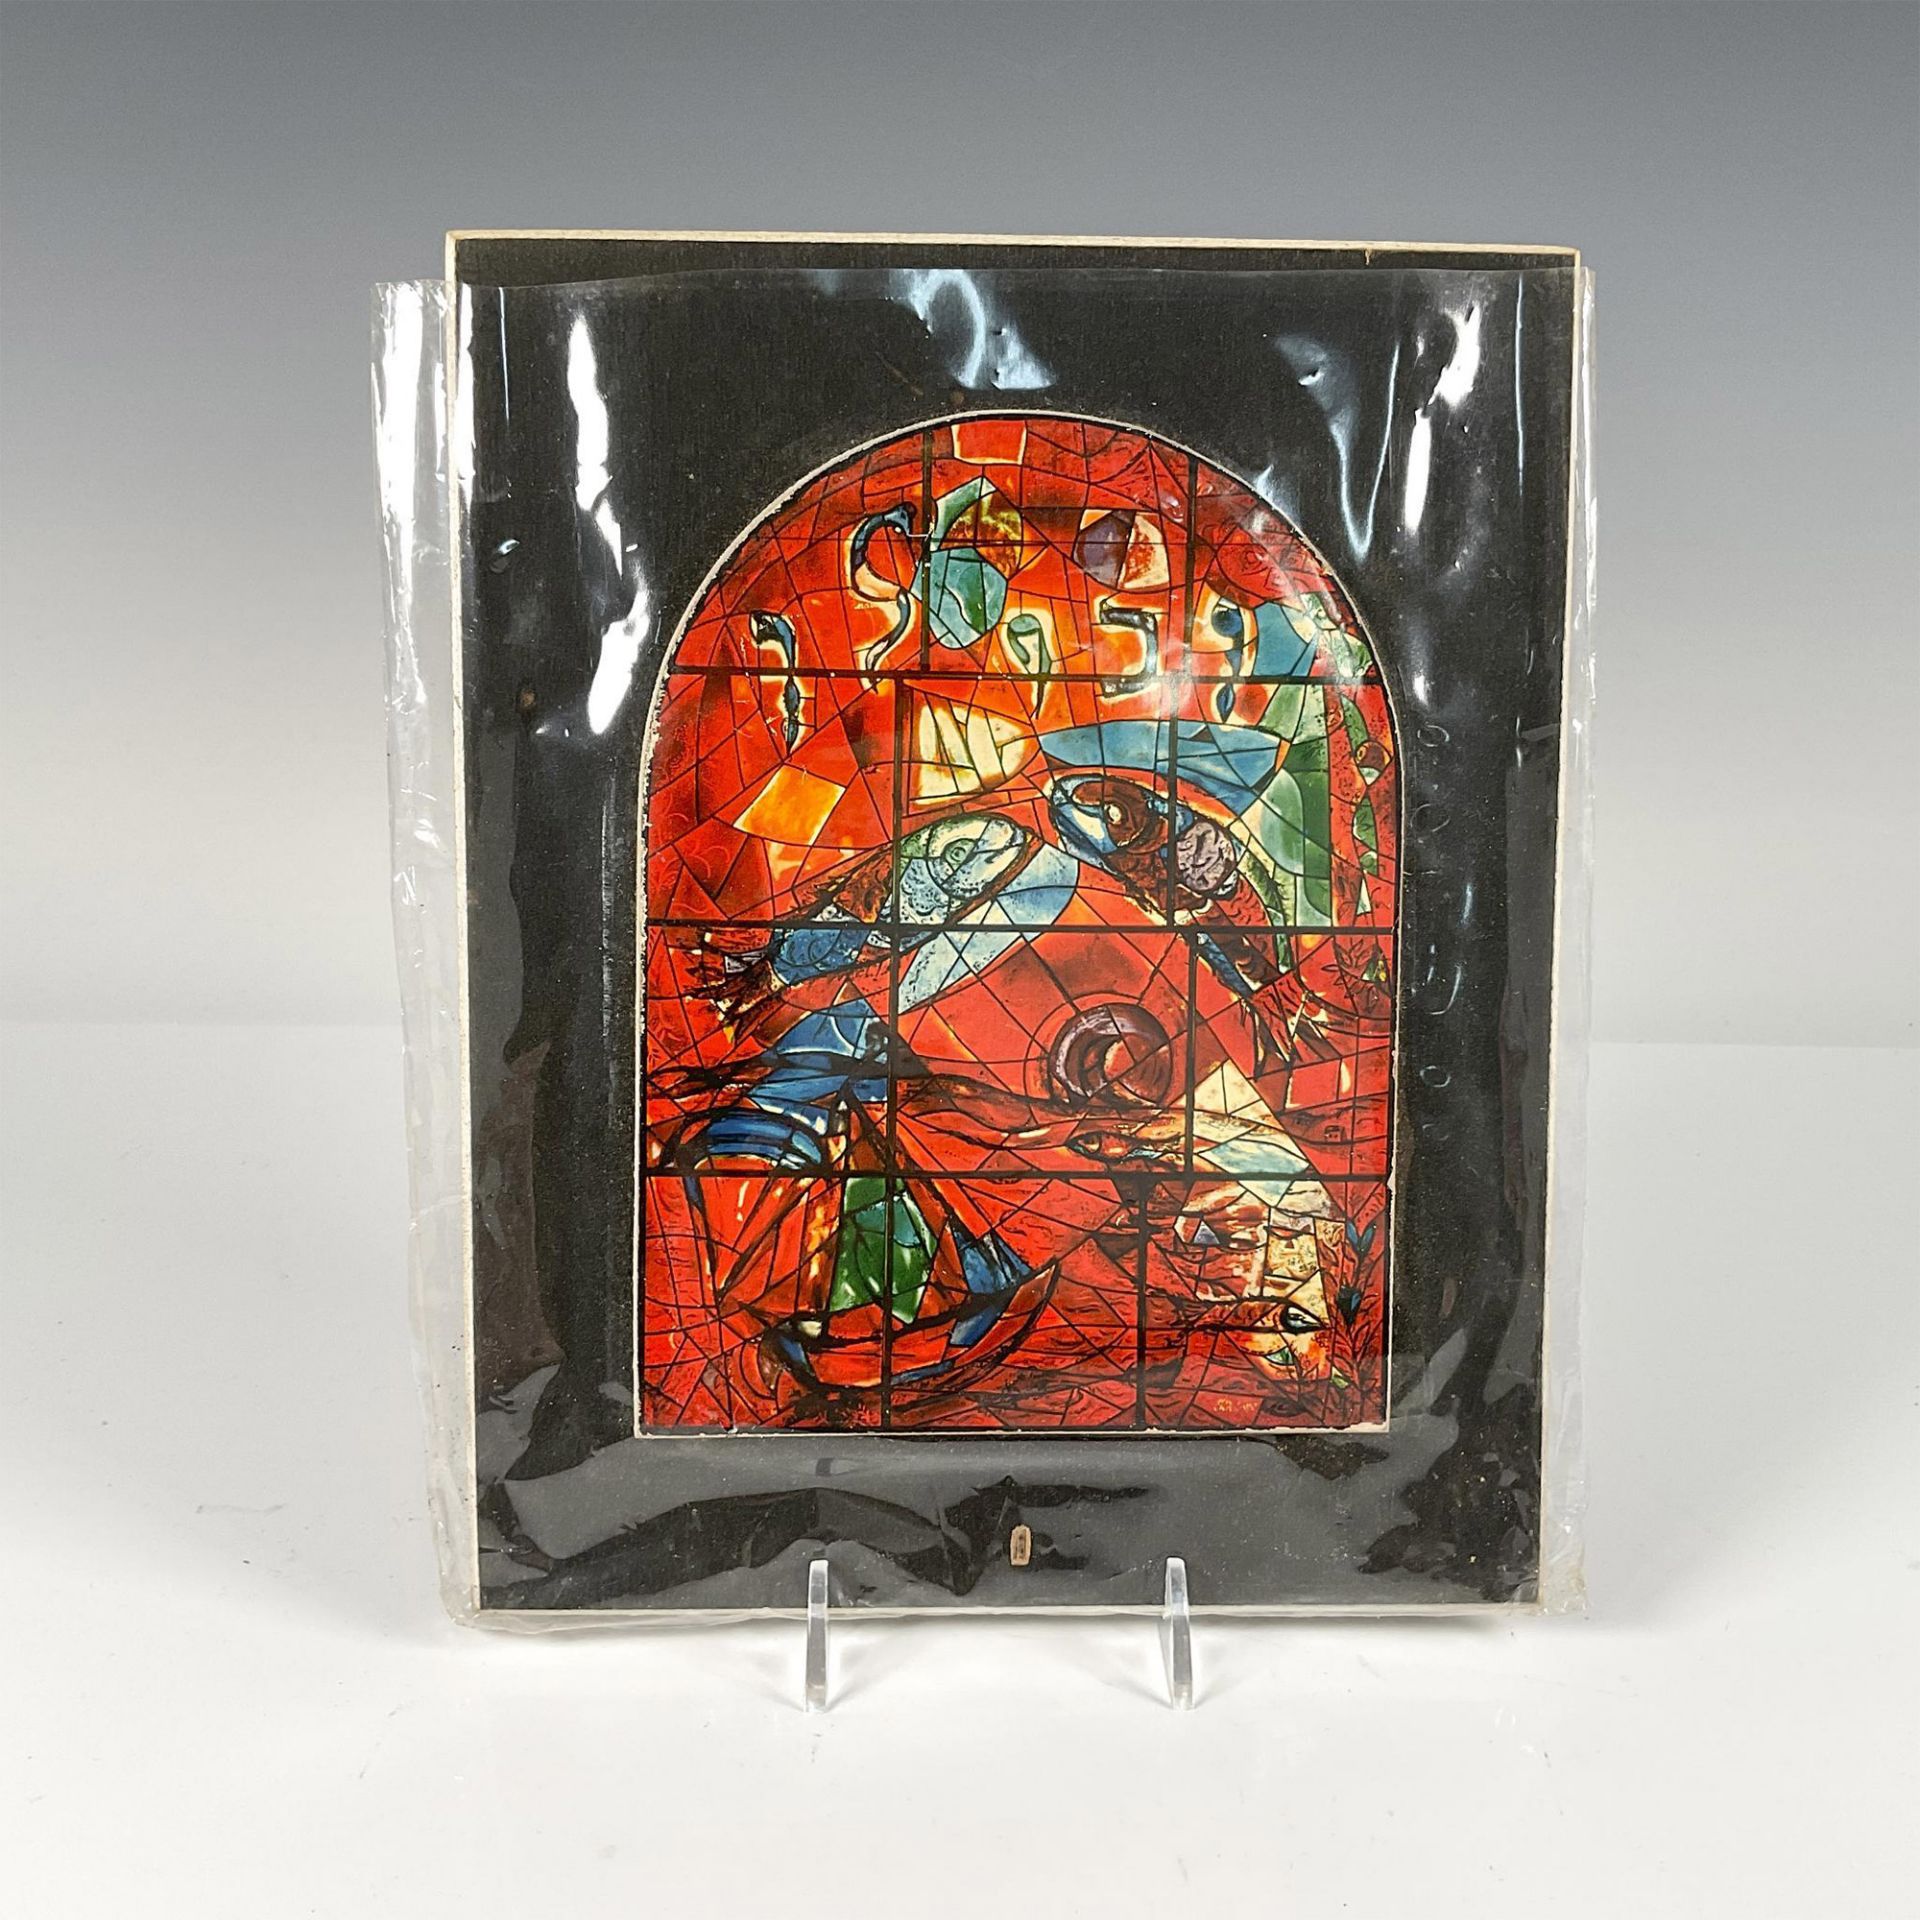 13pc After Marc Chagall by Avissar Wooden Plaques, The 12 Stained Glass Windows - Image 10 of 20